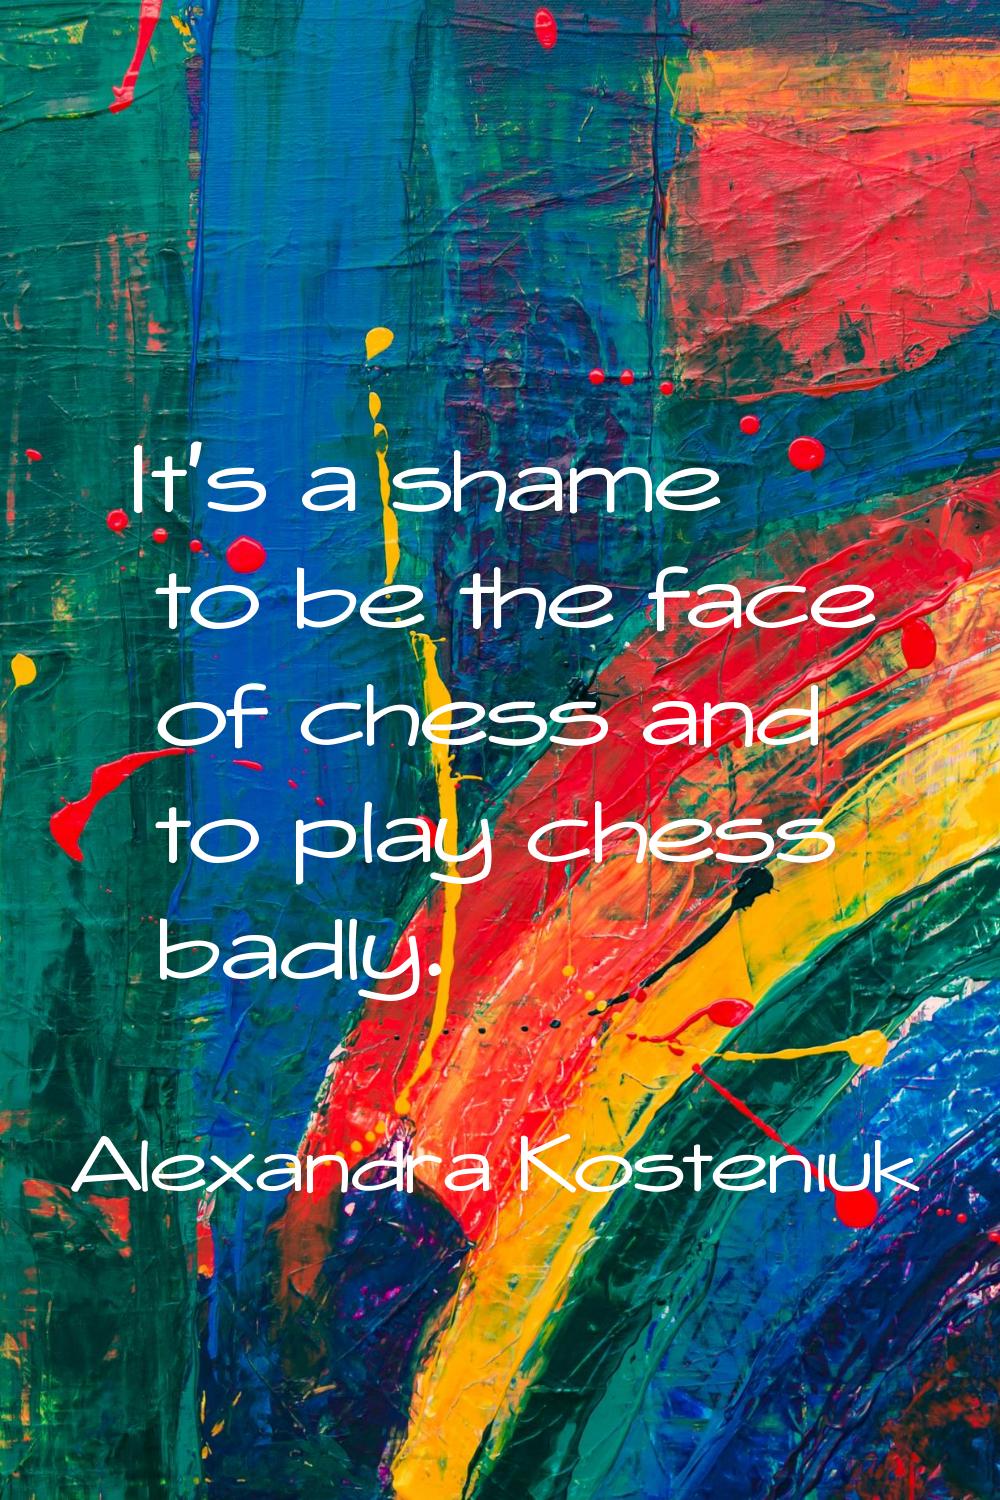 It's a shame to be the face of chess and to play chess badly.